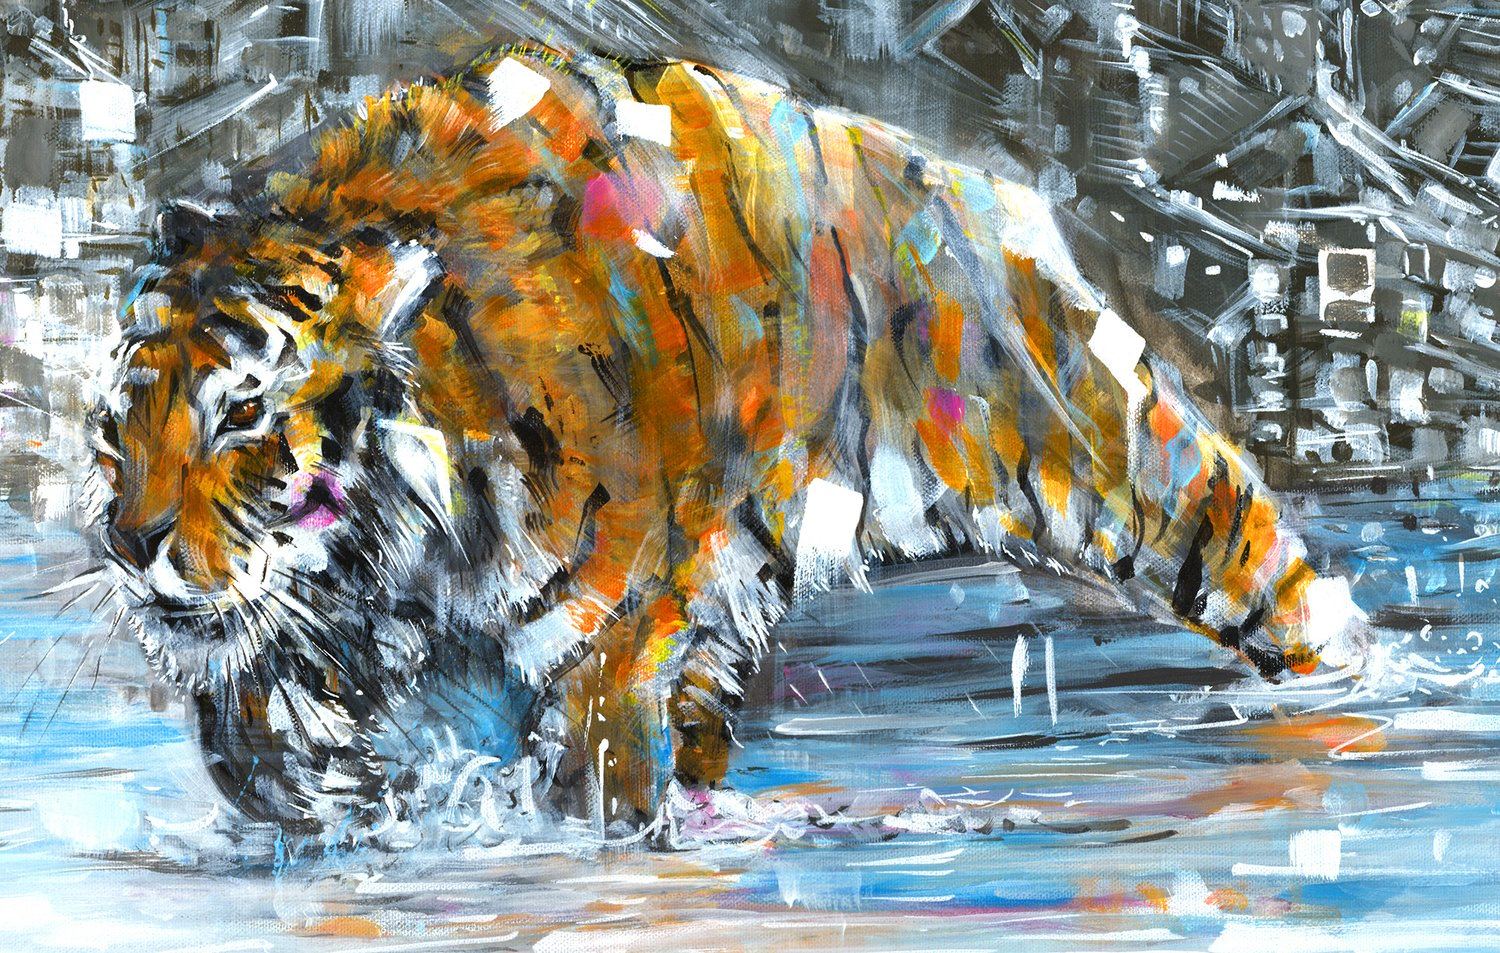 Tiger Painting - Print | Lewis Campbell - Lost Monkey Art